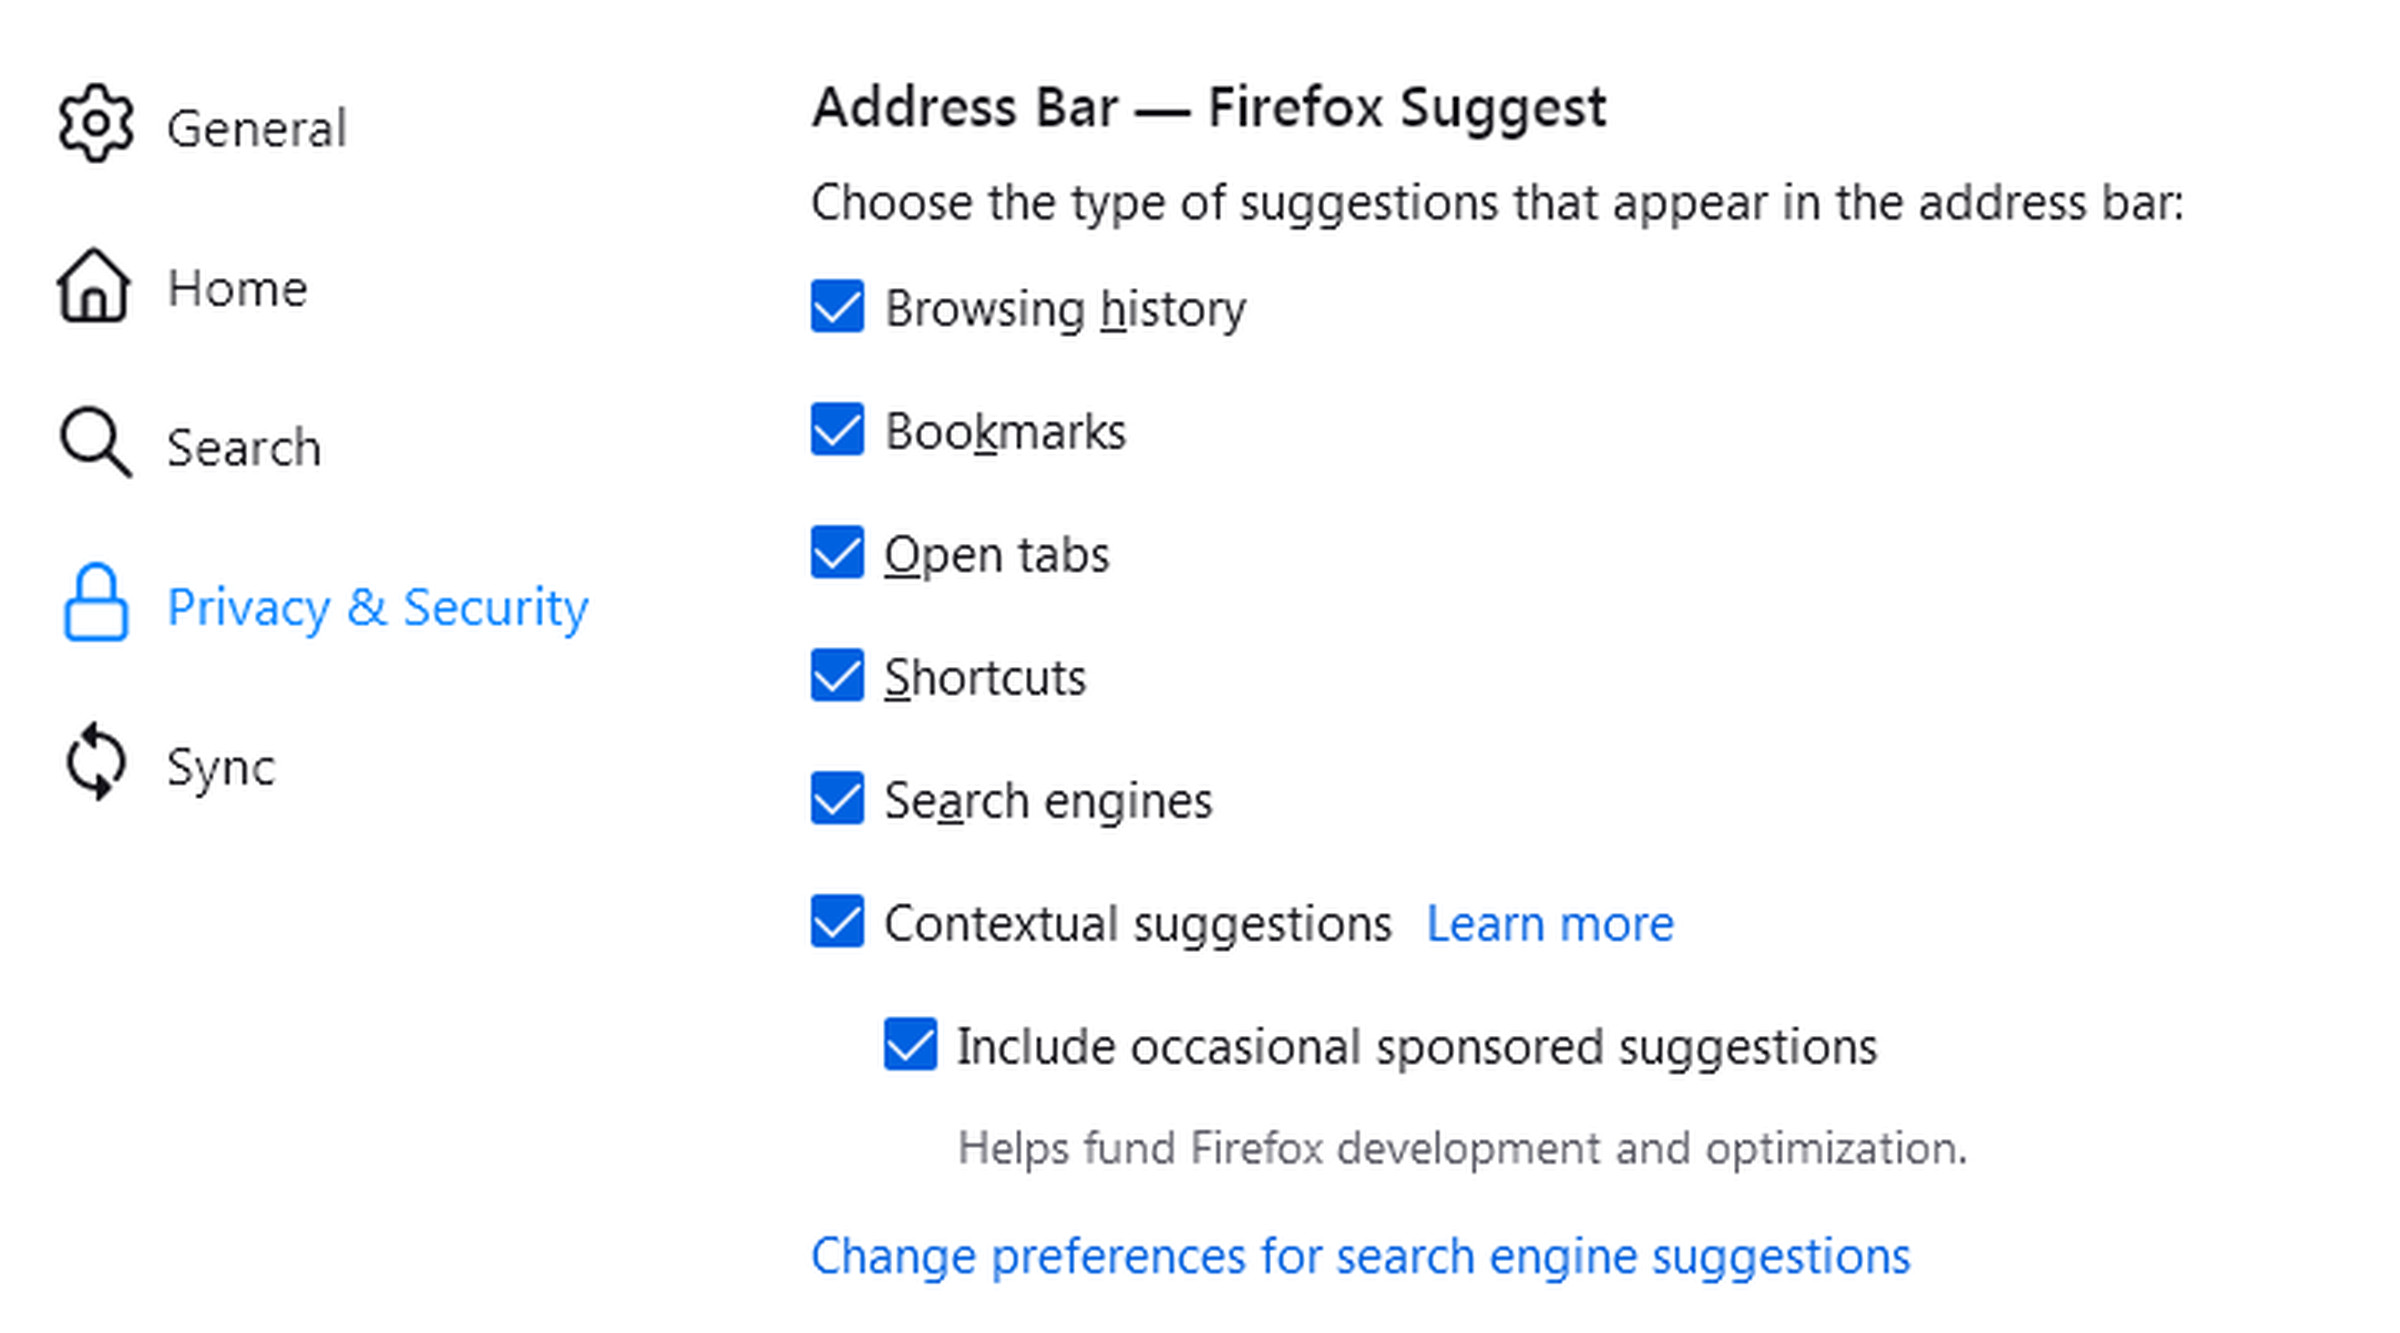 You can disable Firefox Suggest in settings.